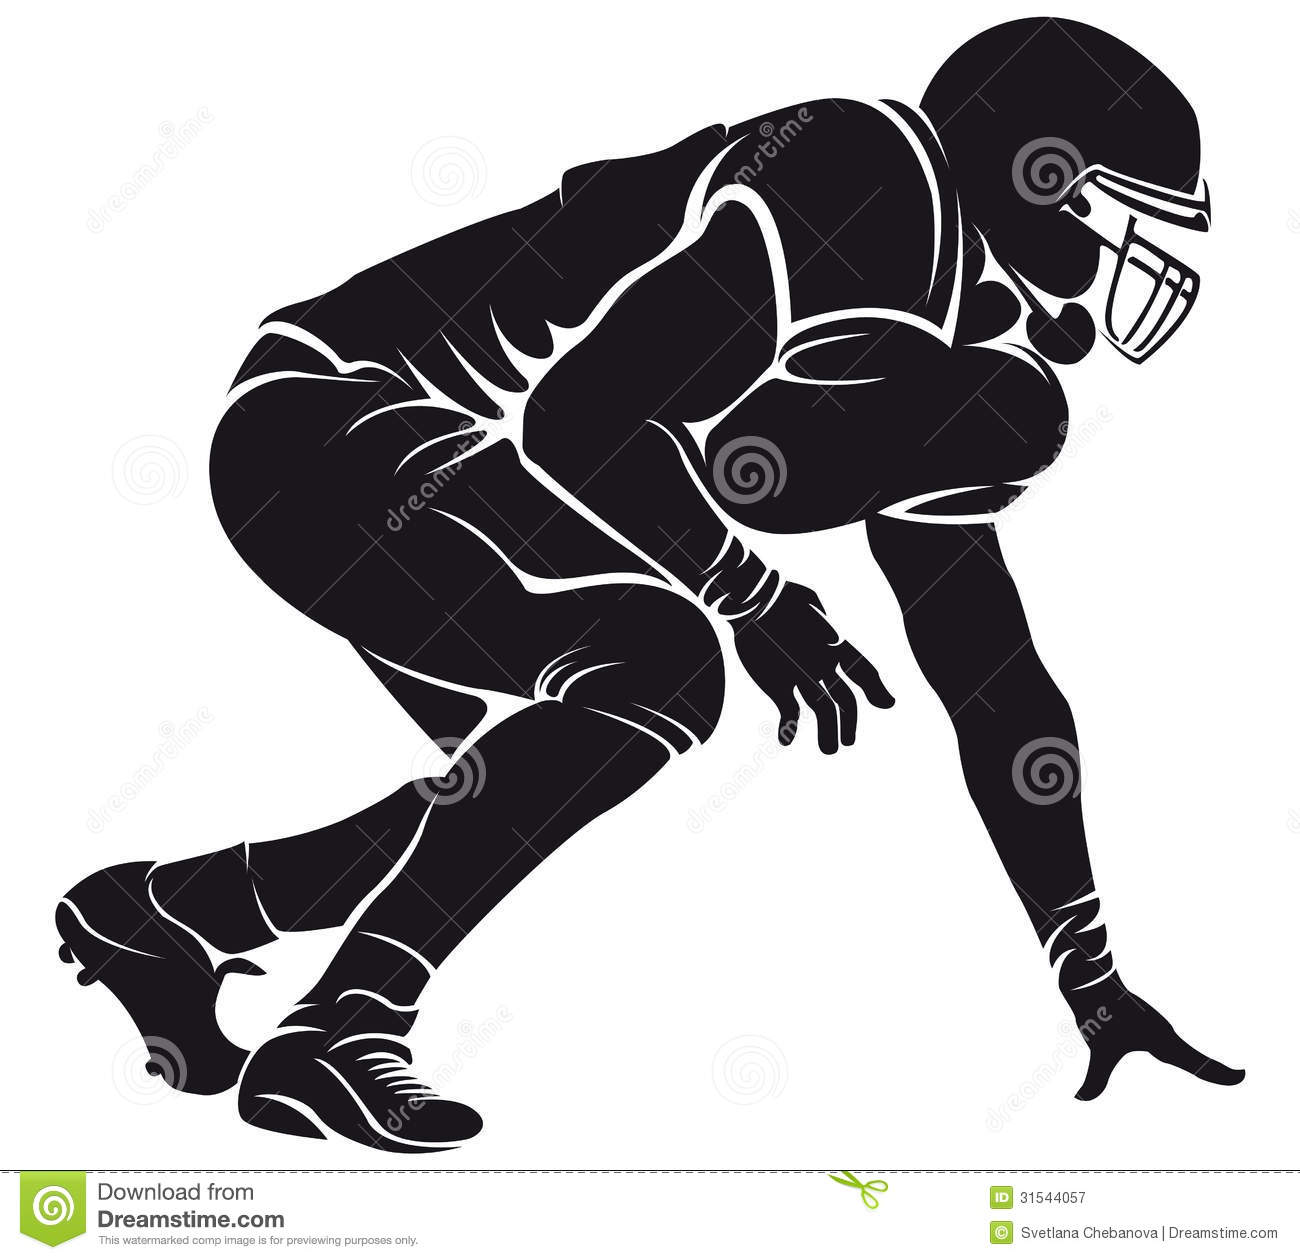 American Football Player Silhouette Royalty Free Stock Photography